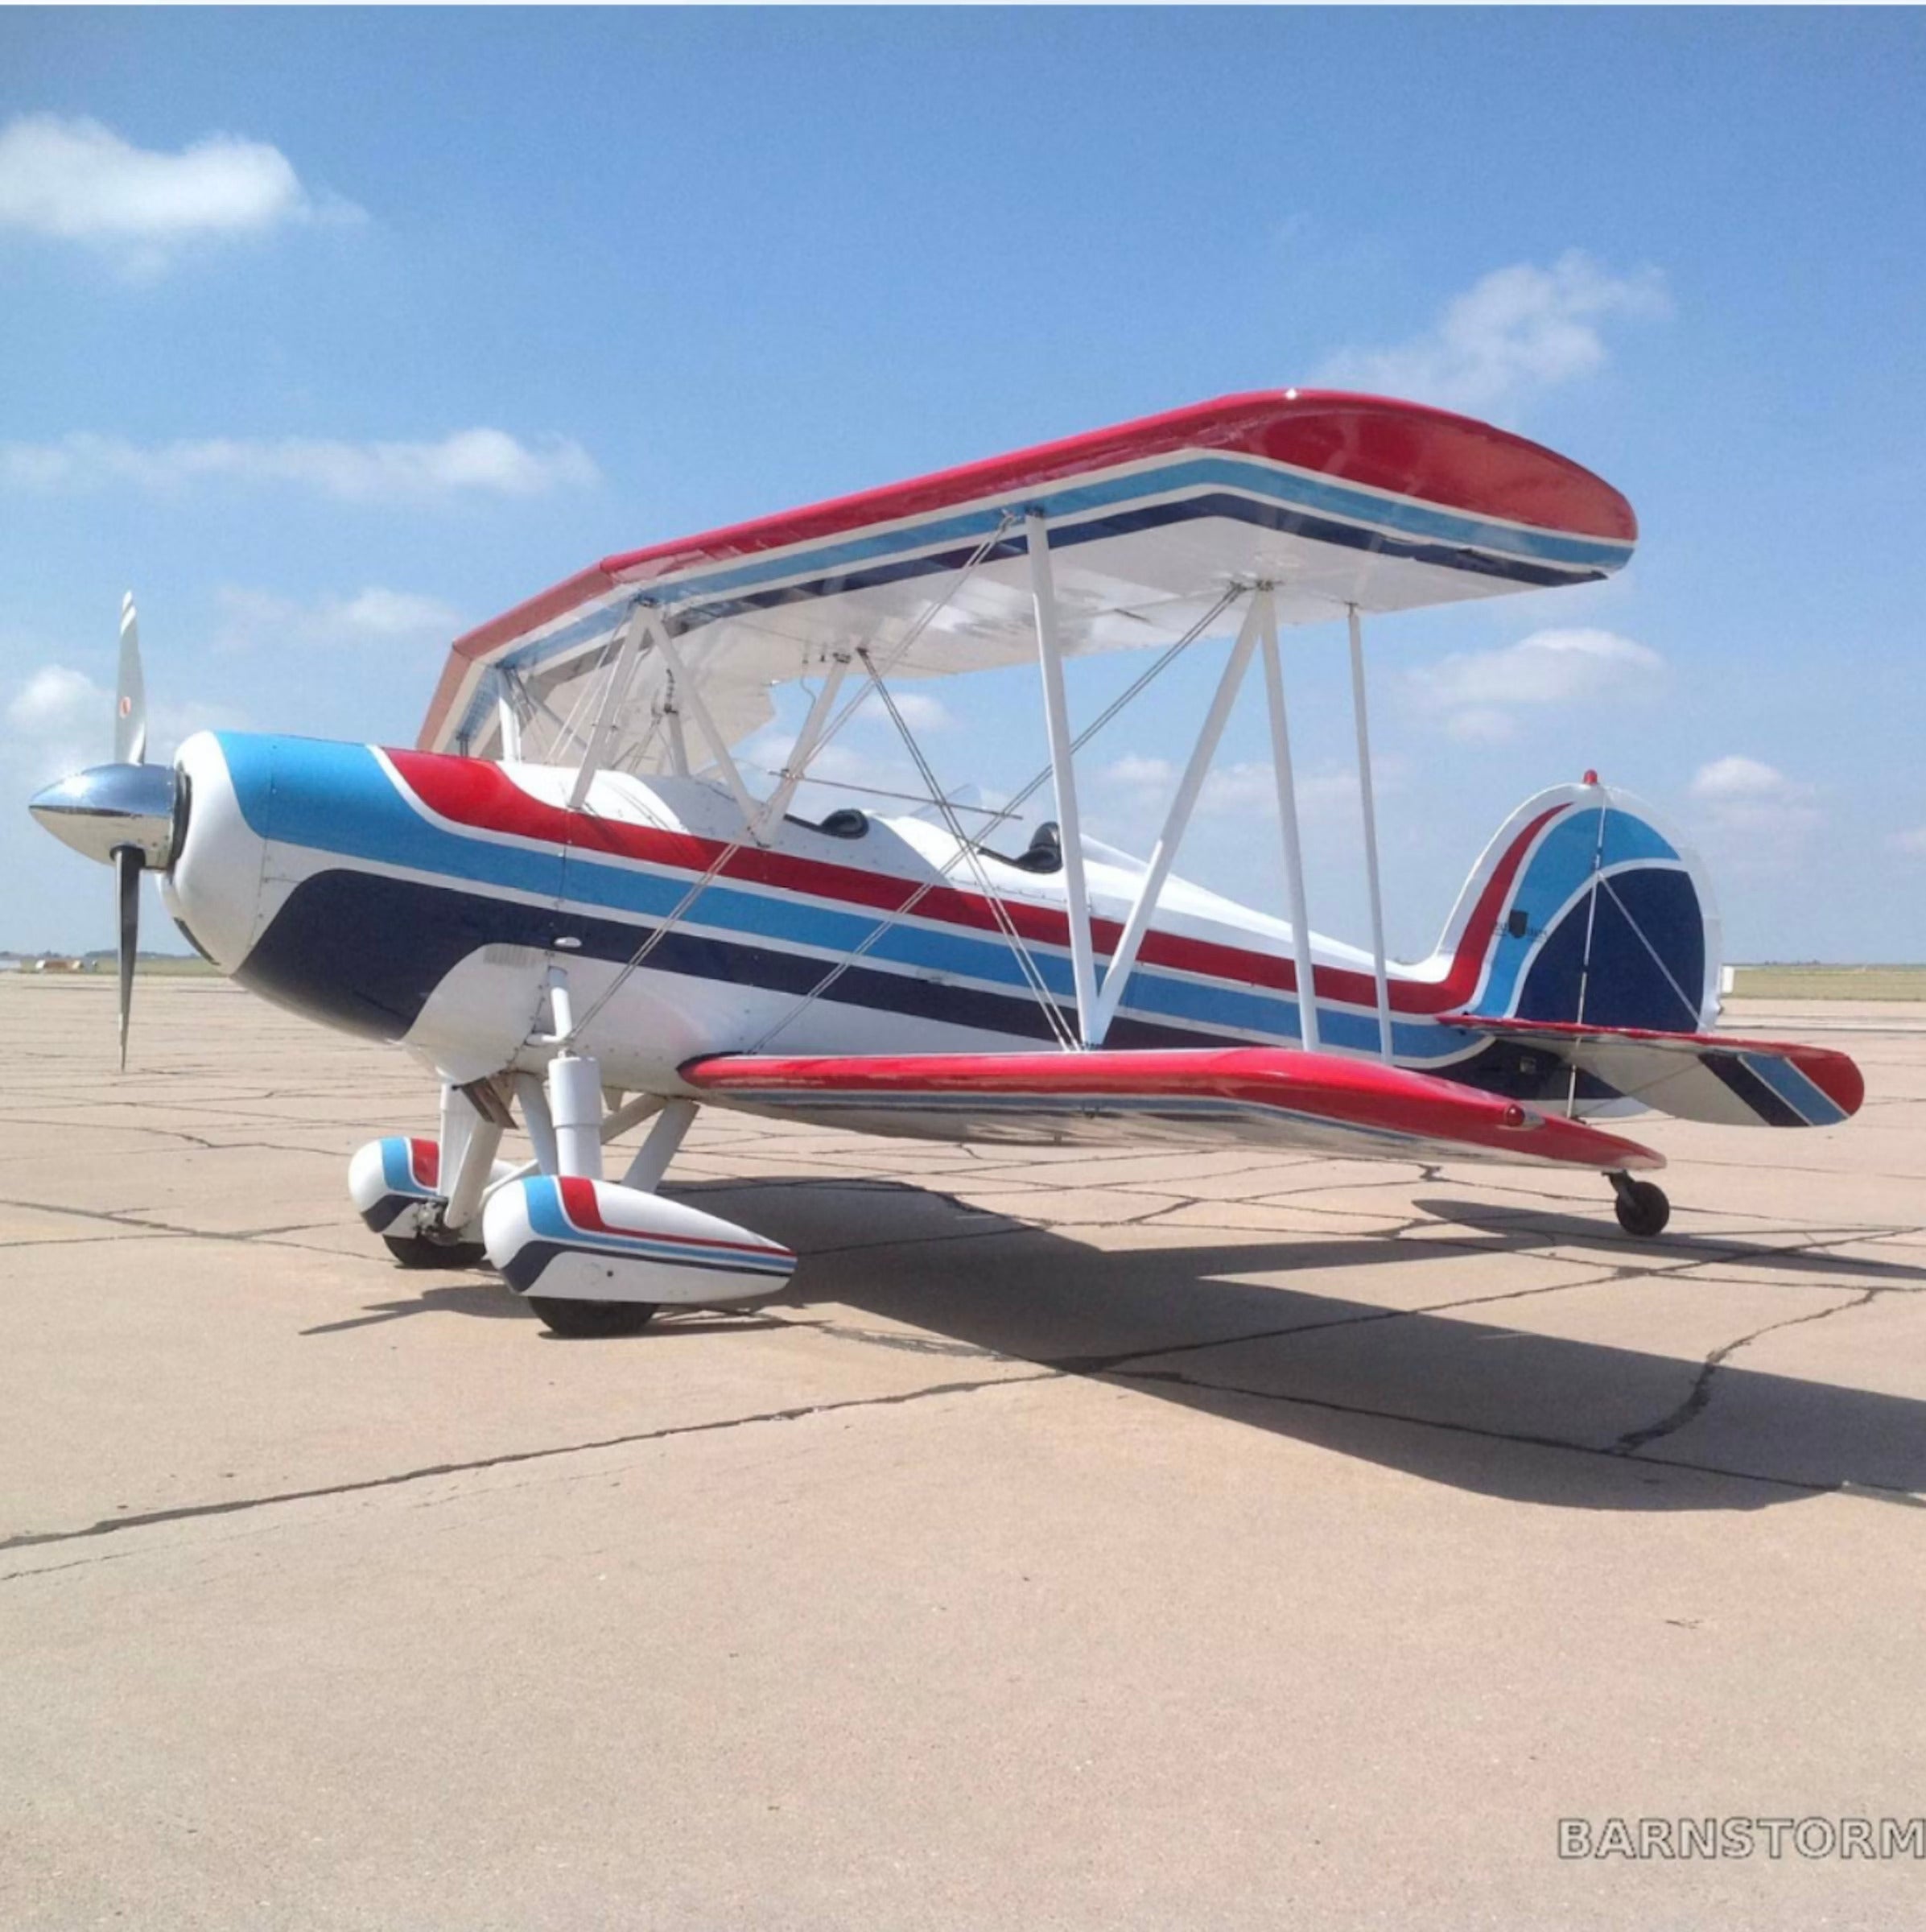 This 1975 Great Lakes 2T-1A-2 Is a Golden Age, Aerobatic ‘AircraftForSale’ Top Pick